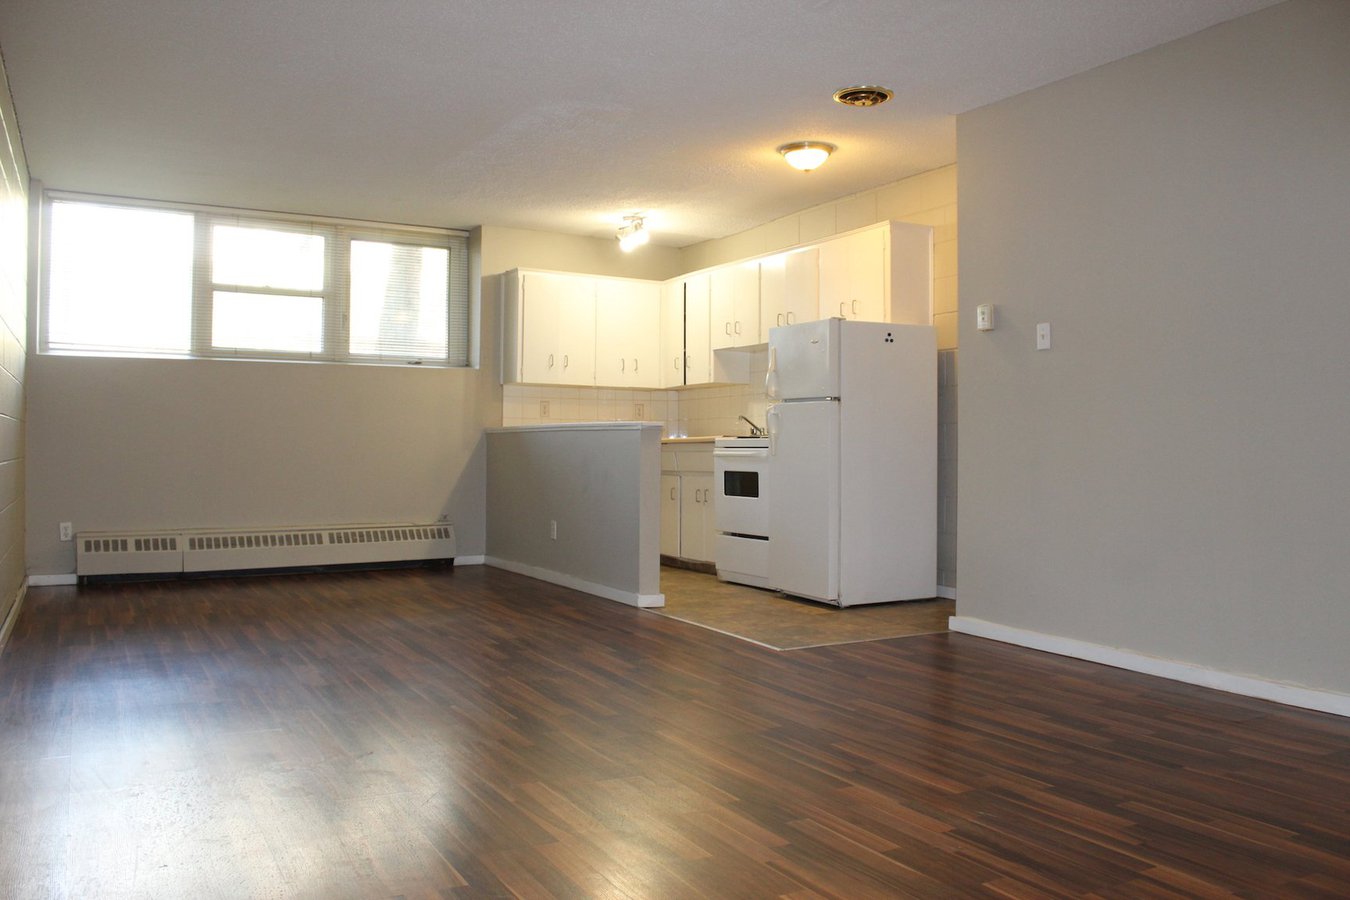 Apartment for rent at 1639 26 Avenue SW, Calgary, AB. This is the kitchen. It has hardwood floor, tile floor, natural light, oven, radiator and refrigerator.